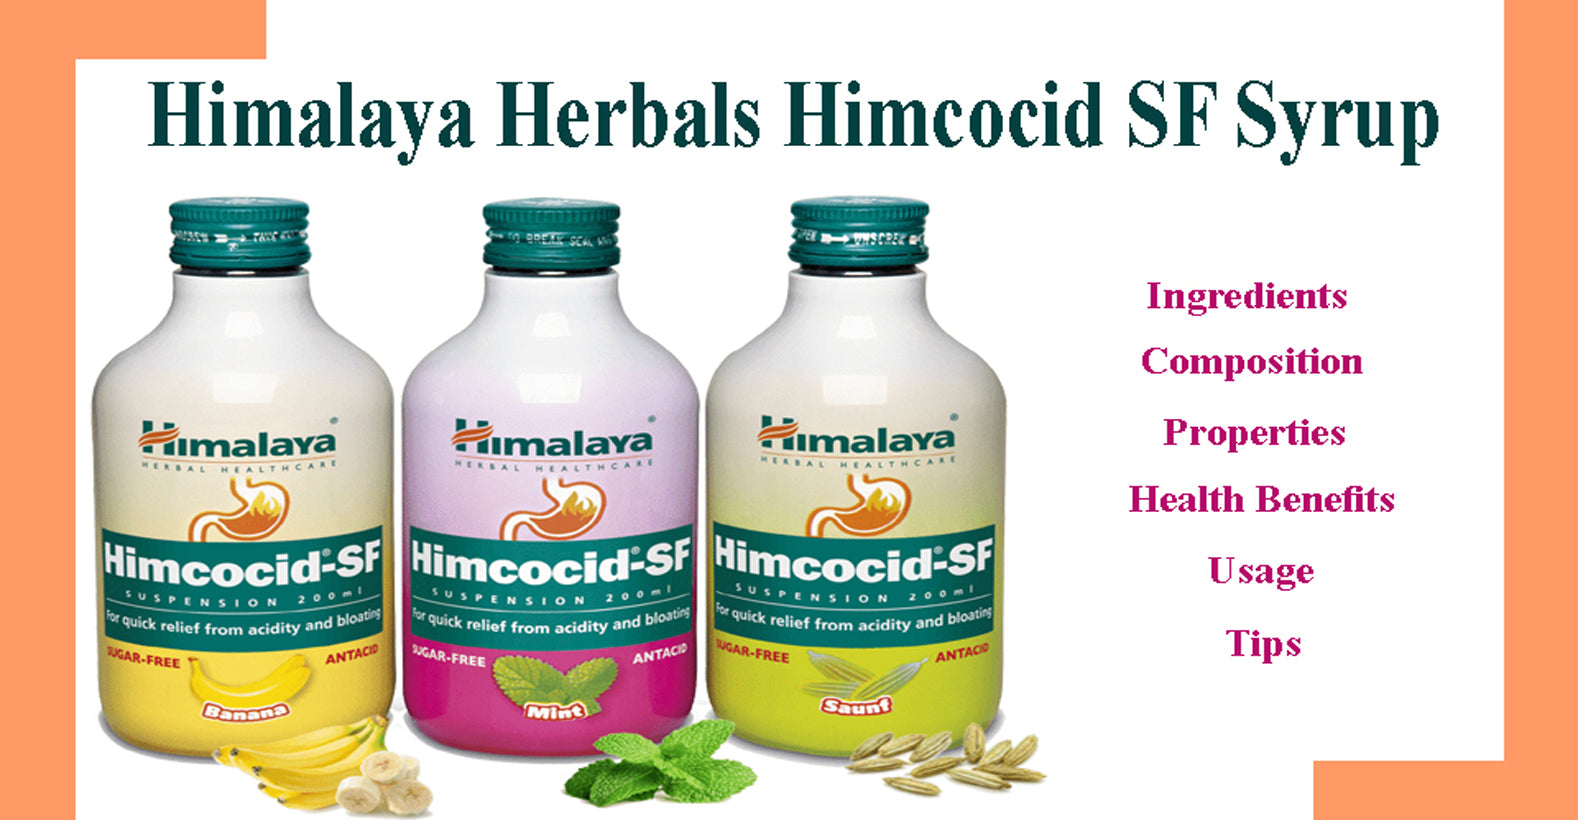 Himalaya Herbals Himcocid SF Syrup - Ingredients, Composition, Properties, Health Benefits, Usage, Tips